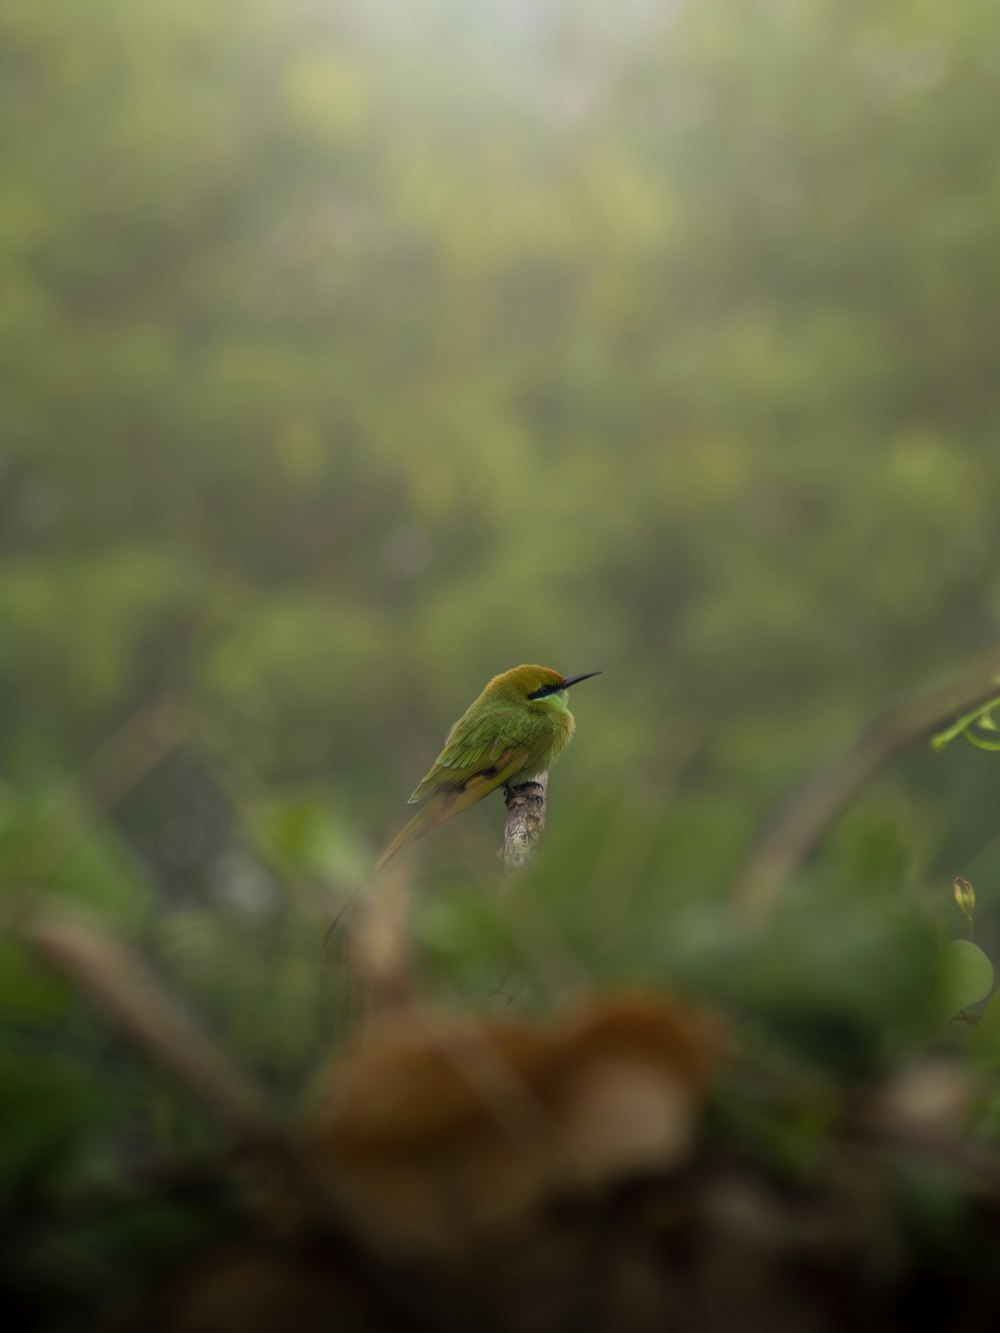 a small green bird sitting on top of a tree branch